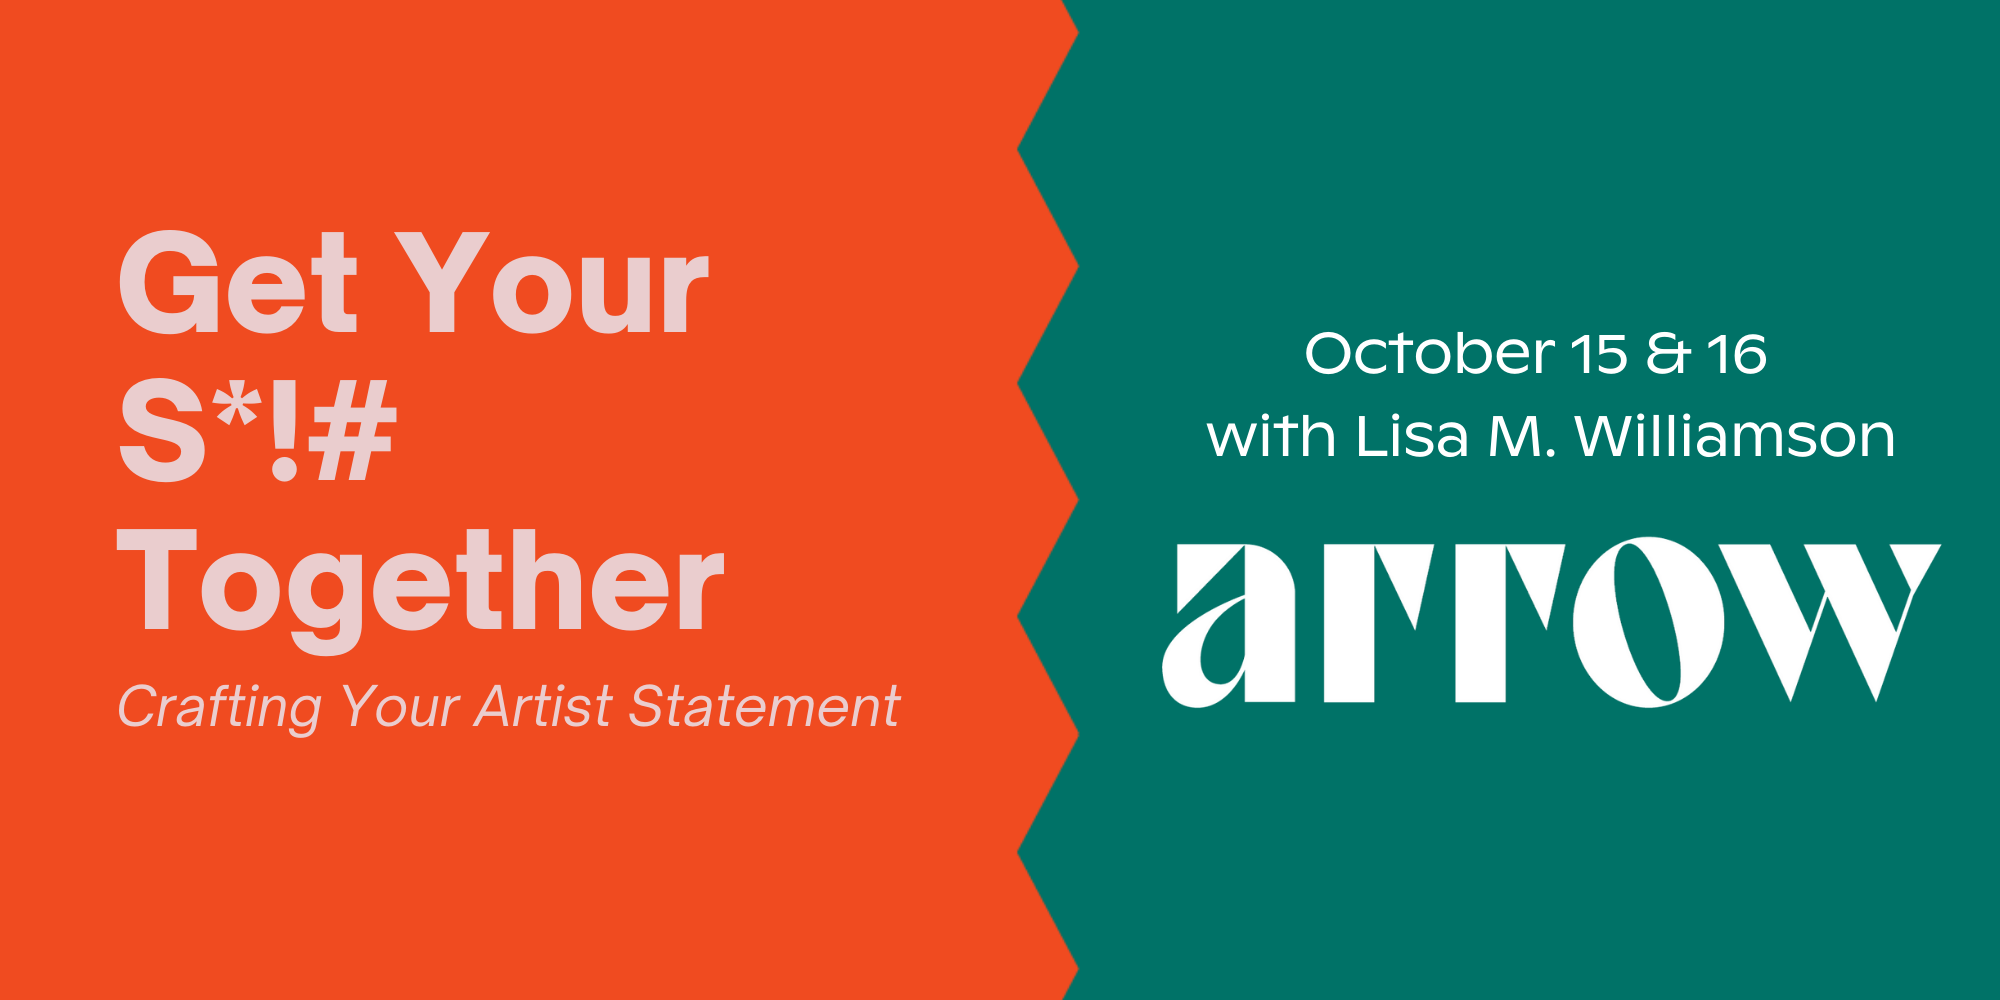 Crafting Your Artist Statement with Lisa M. Williamson promotional image